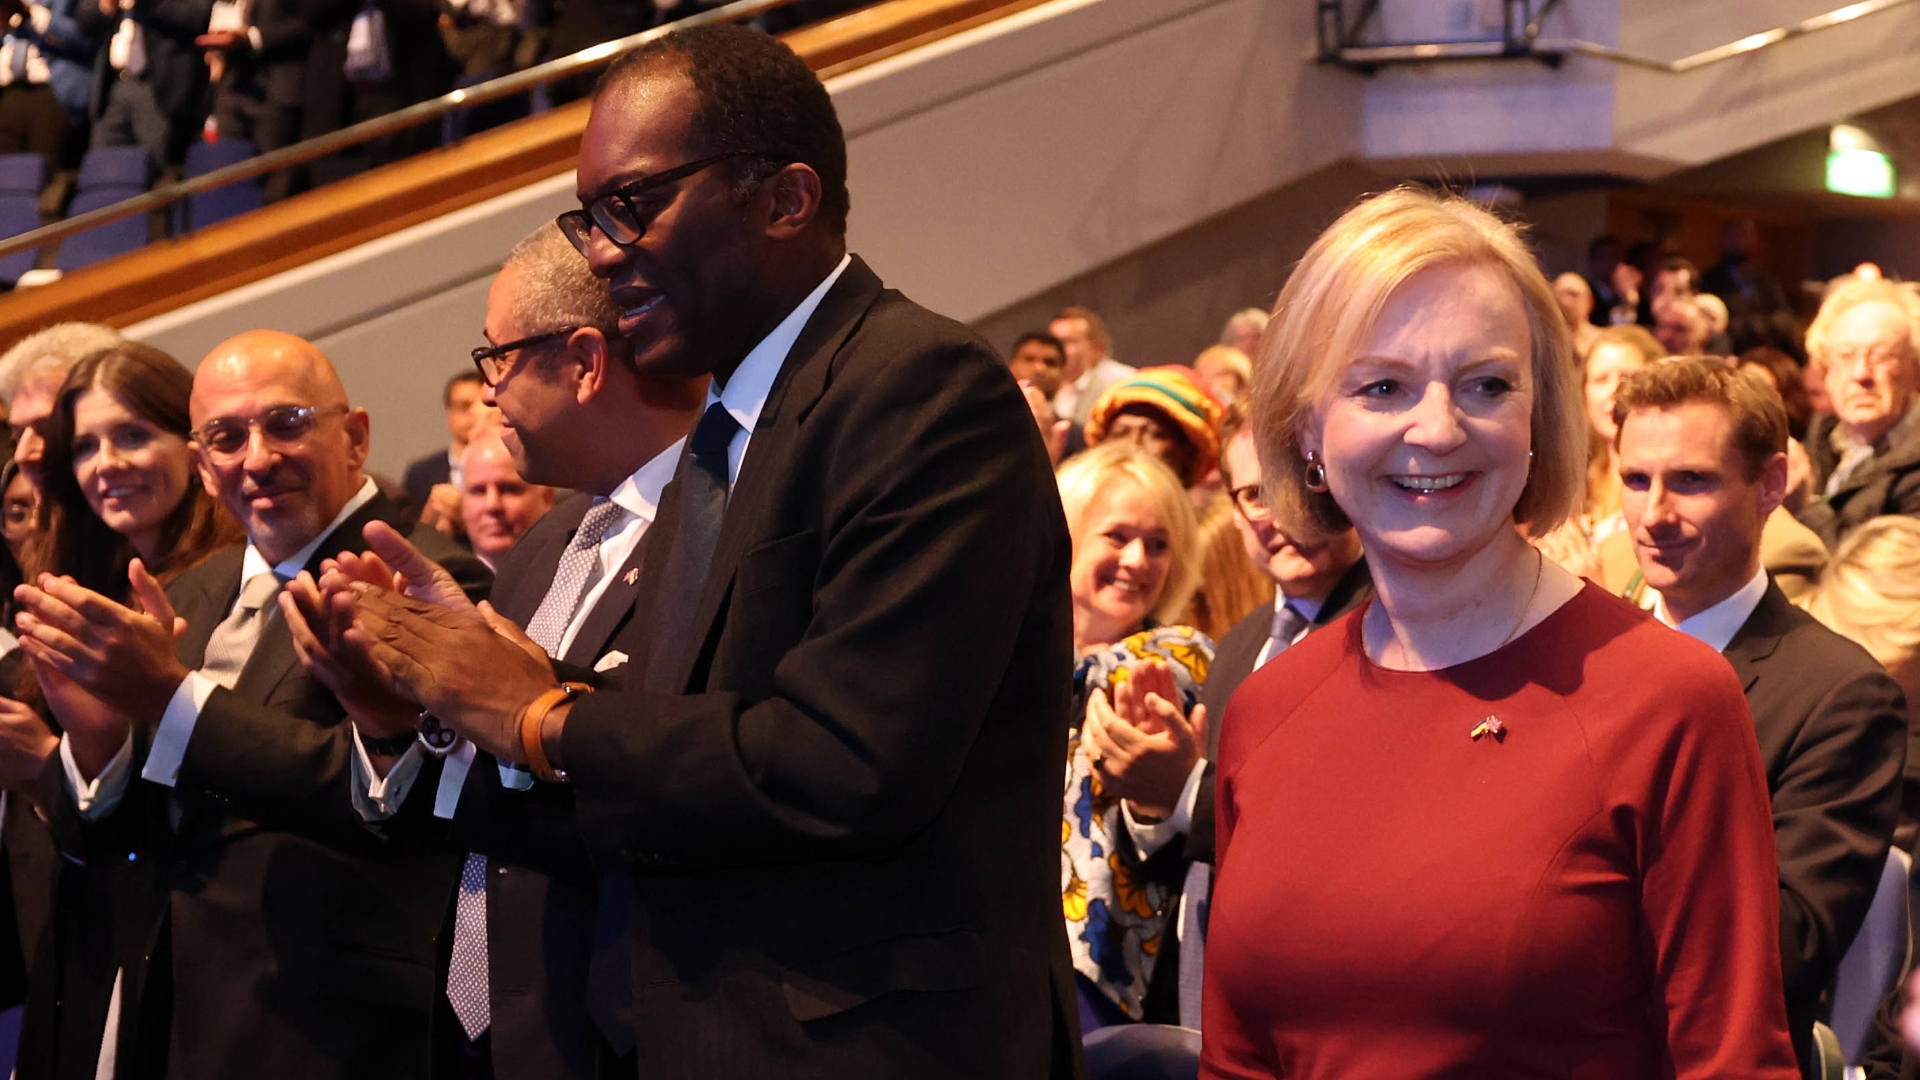 The Chancellor Kwasi Kwarteng and Prime Minister at conference.